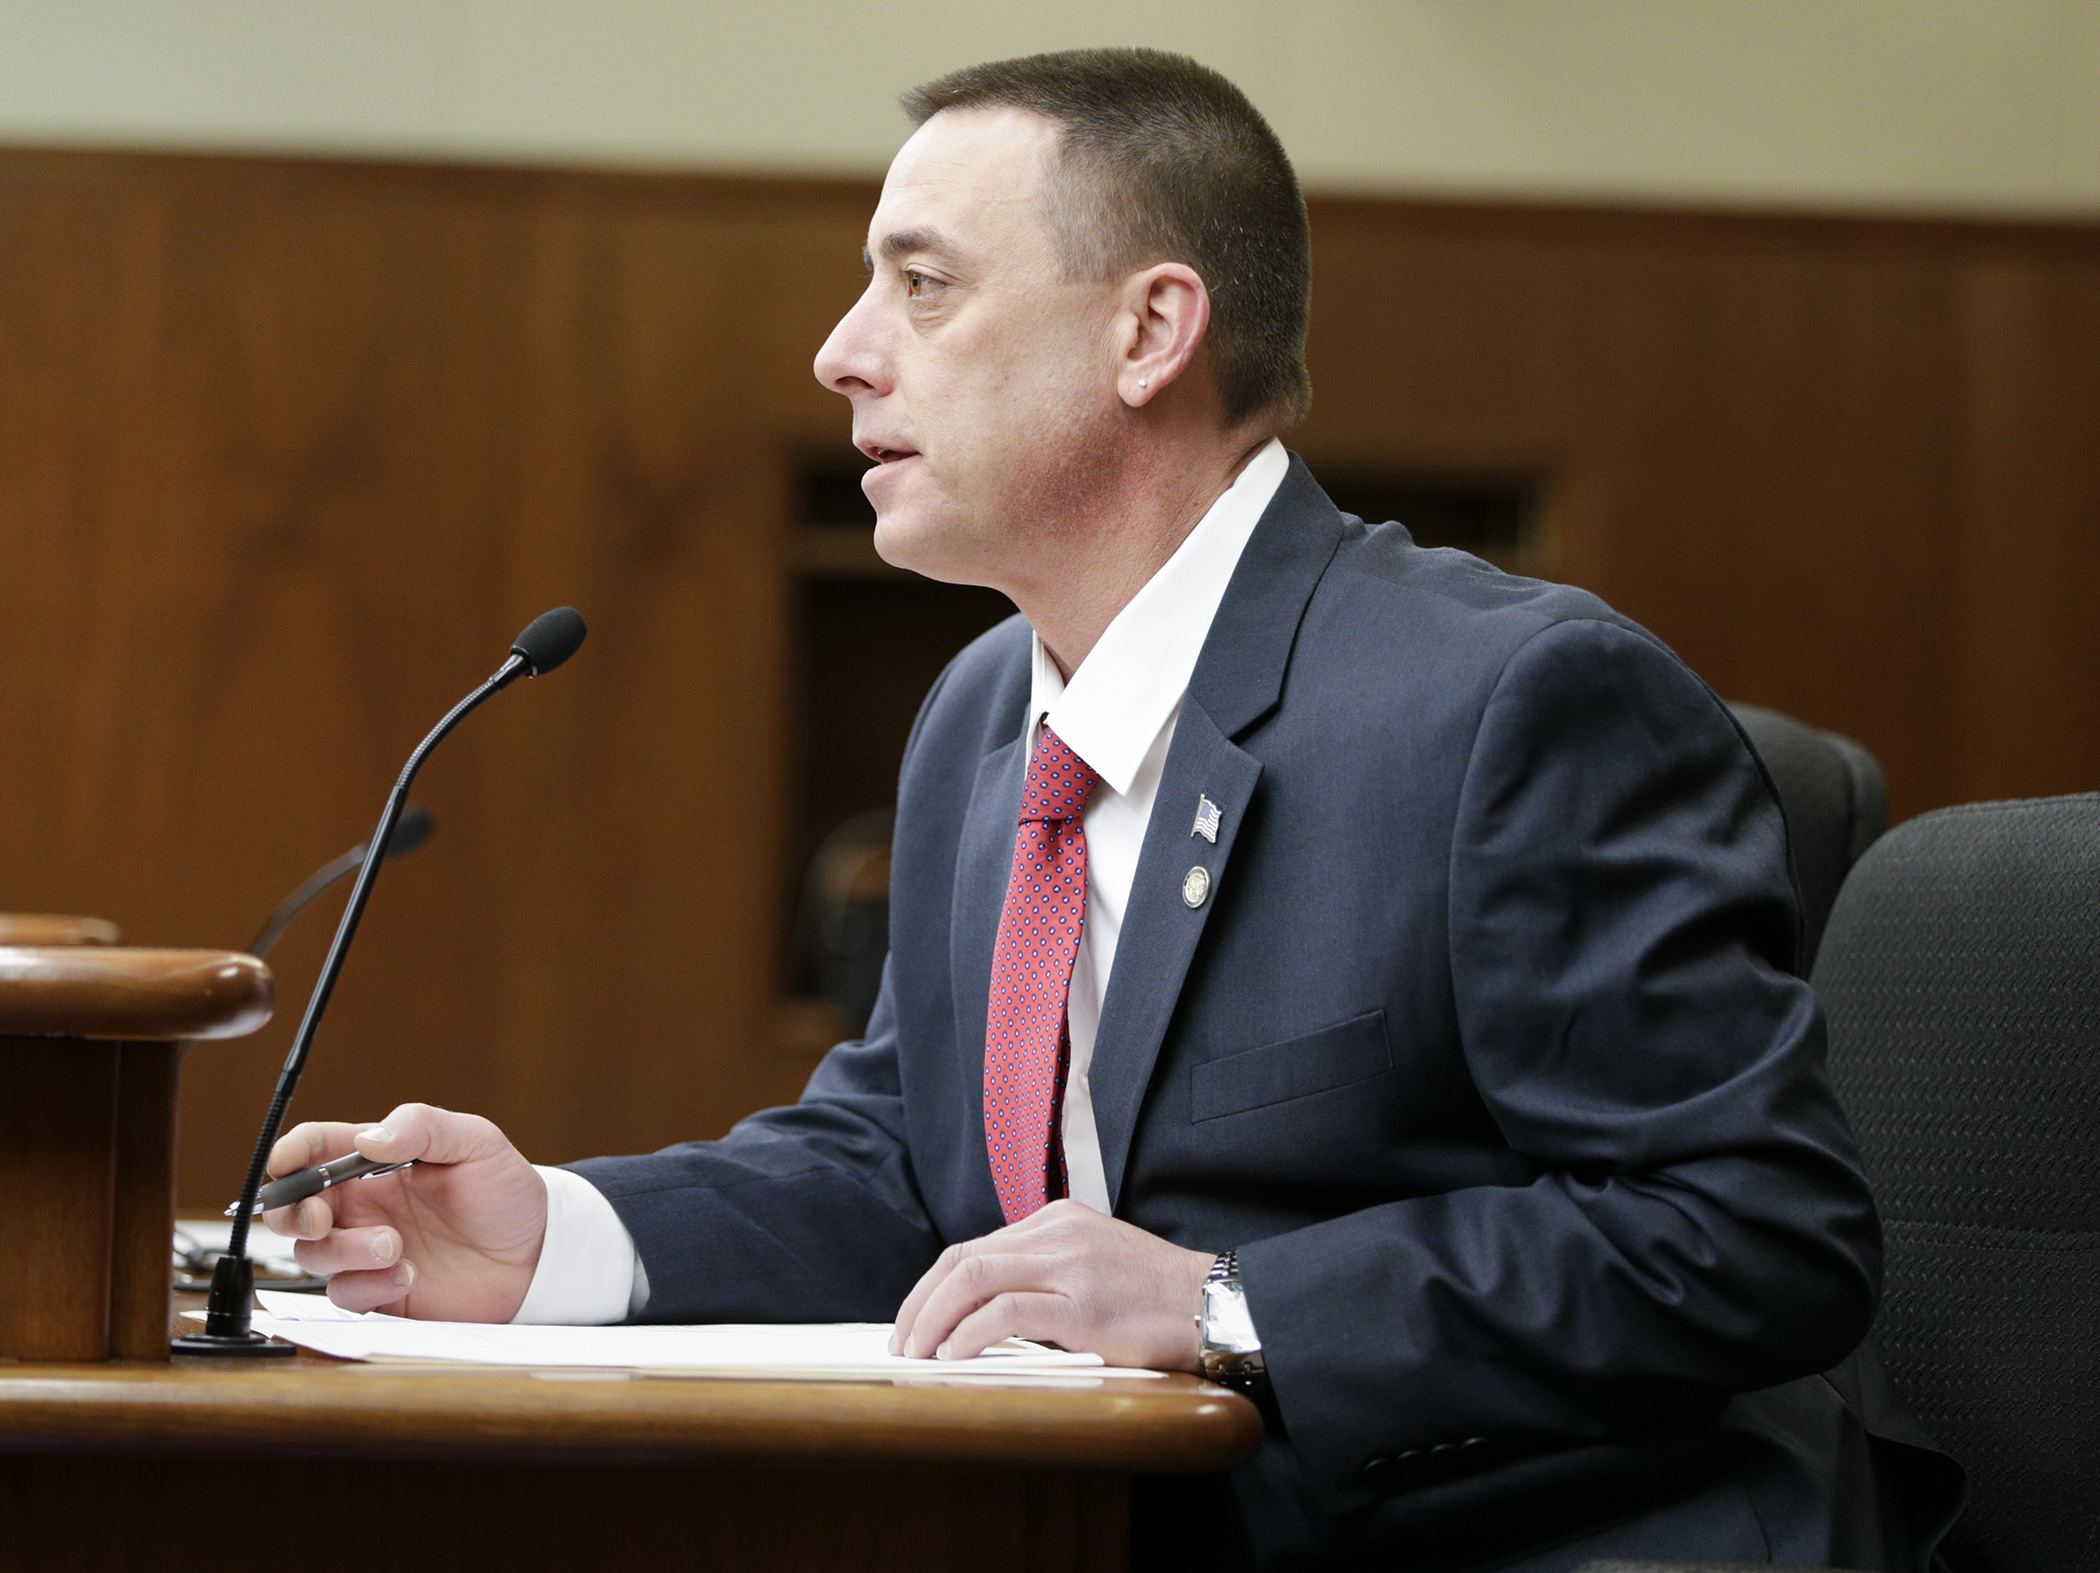 Rep. Keith Franke discusses a bill he sponsors, HF1475, with the House Public Safety and Security Policy and Finance Committee March 16. It would create a felony crime to solicit or provide support for an act of terrorism. Photo by Paul Battaglia